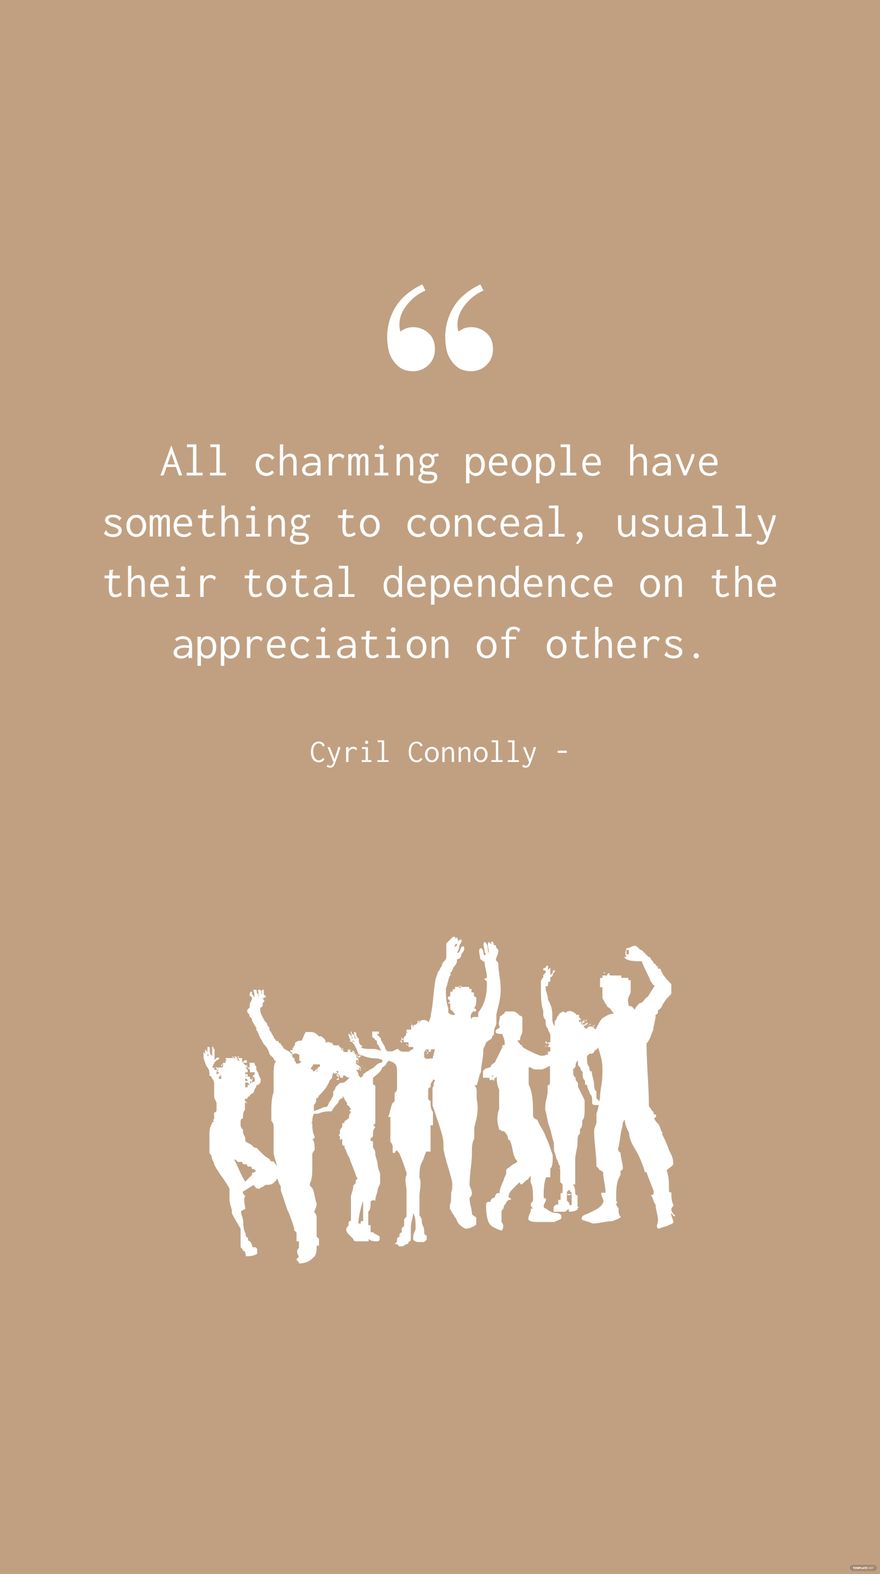 Cyril Connolly - All charming people have something to conceal, usually their total dependence on the appreciation of others.